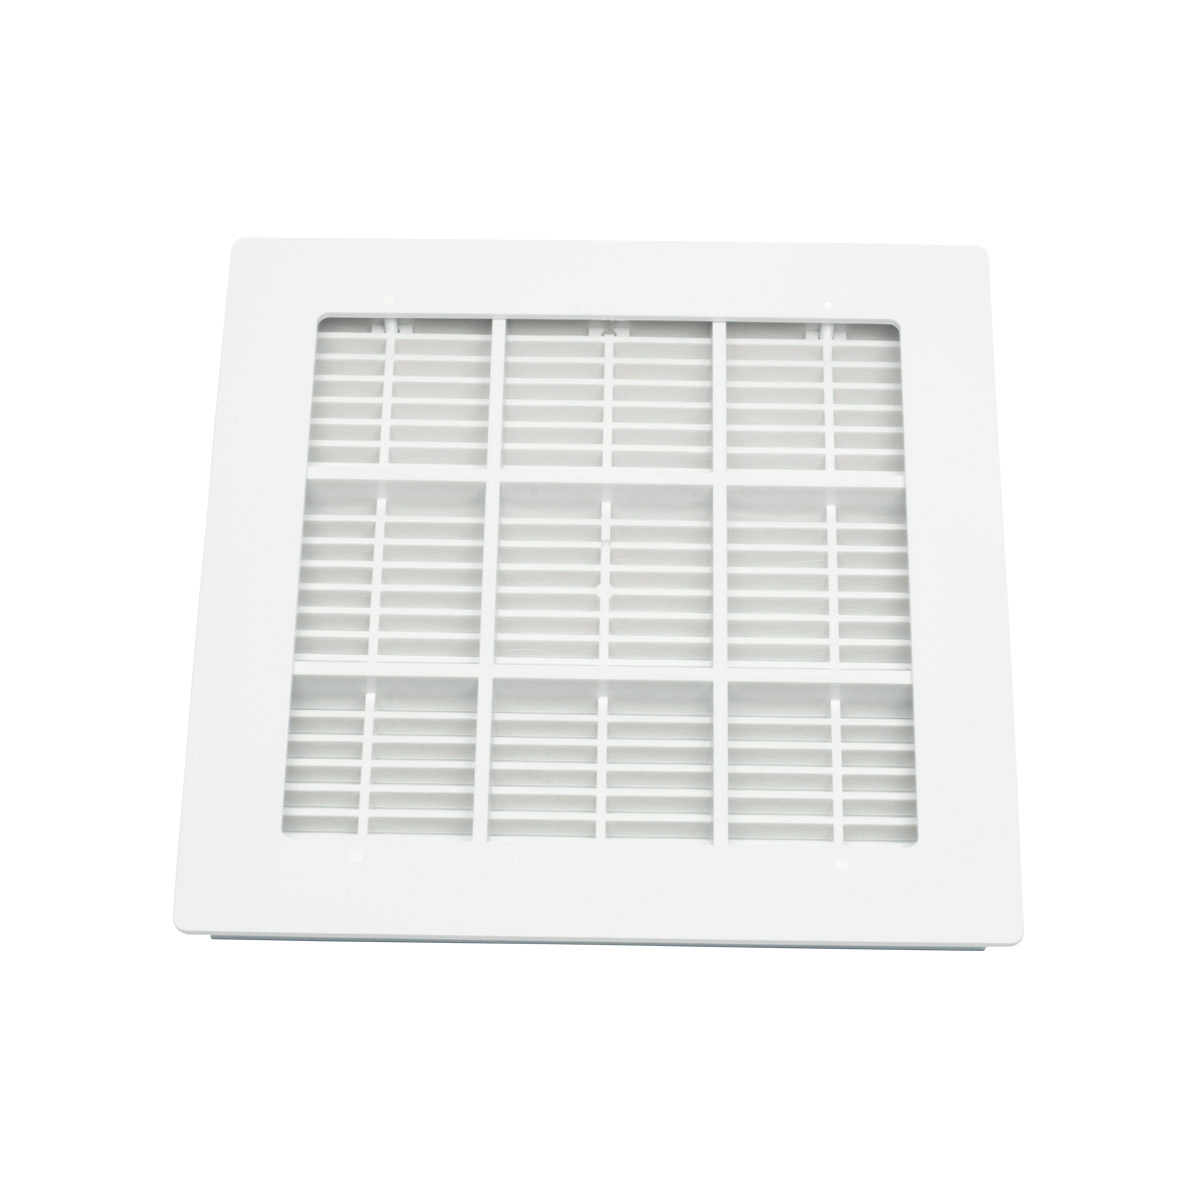 Main drain ABS white 265 x 265mm complete mounted UV-resistant Main drain ABS white 265 x 265mm complete mounted UV-resistant